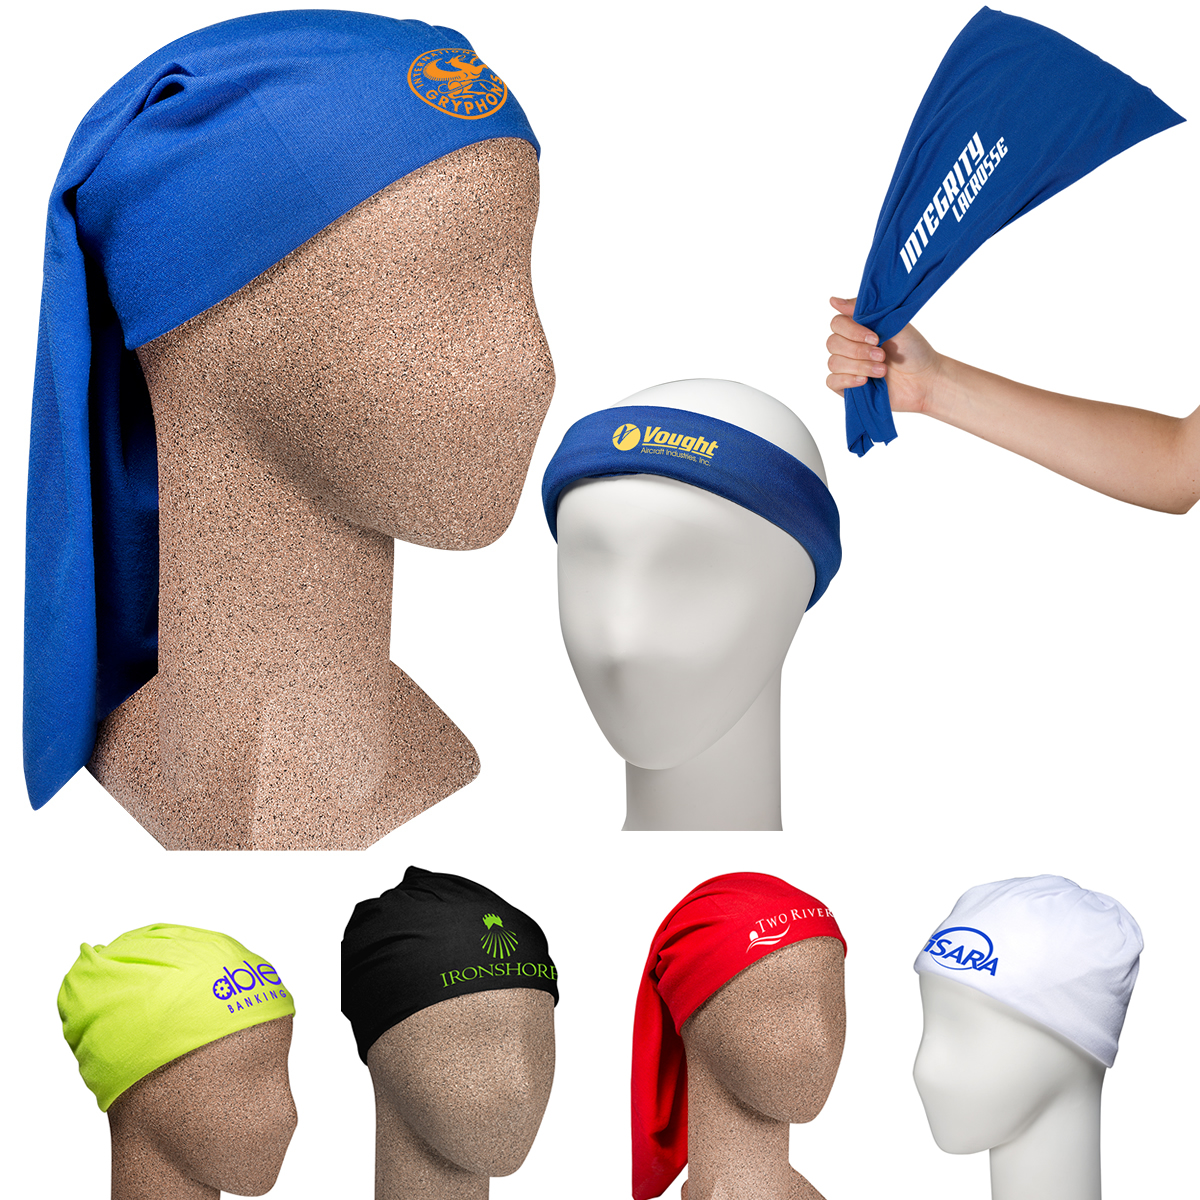 Customized Yowie Express Multi-Functional Rally Wear | Promotional ...